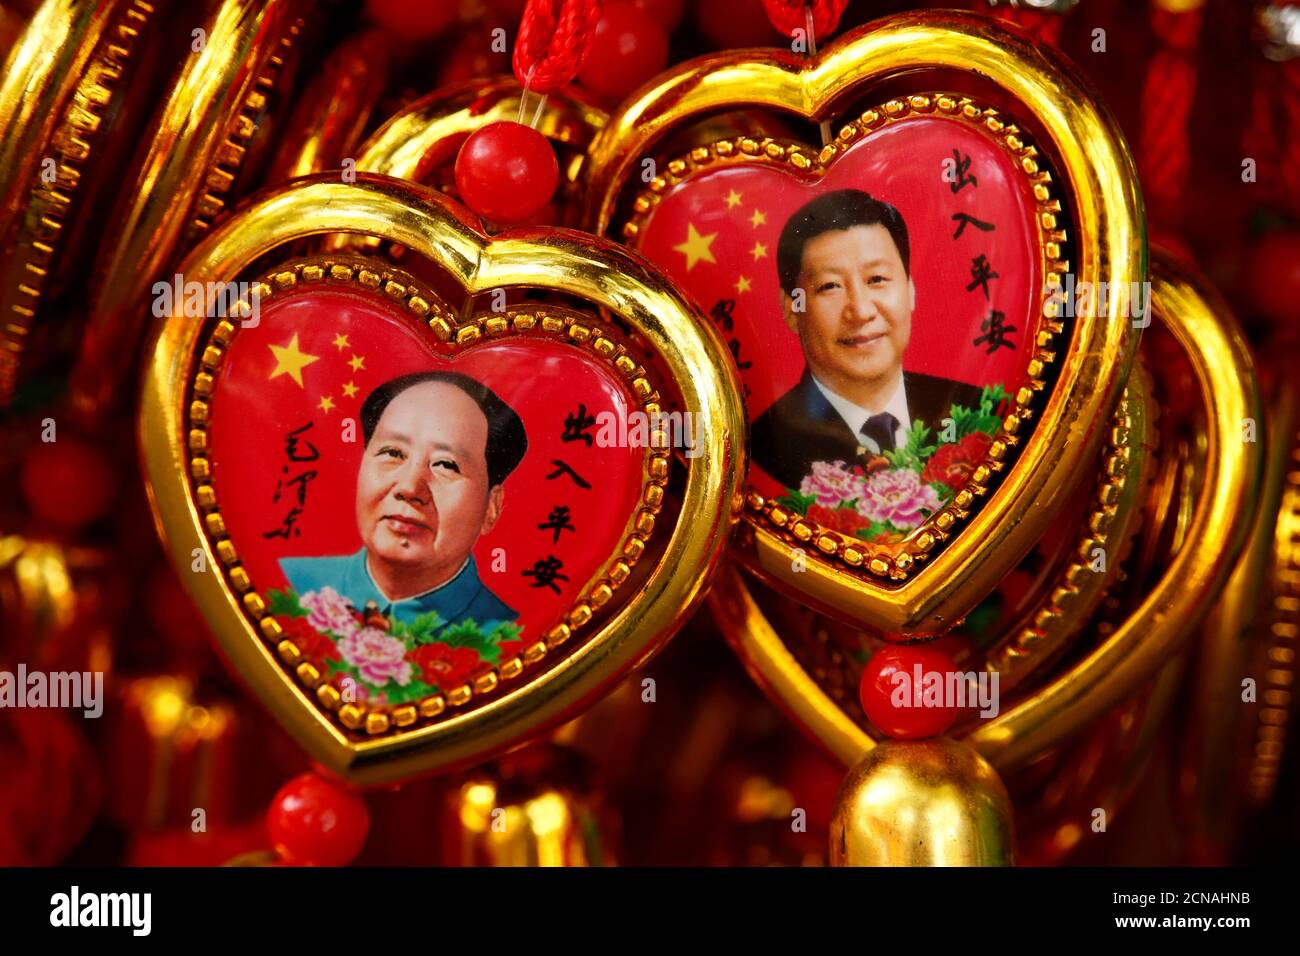 Souvenirs featuring portraits of China's late Chairman Mao Zedong and China's President Xi Jinping are seen at a shop near the Forbidden City in Beijing, China, September 9, 2016. REUTERS/Thomas Peter     TPX IMAGES OF THE DAY Stock Photo